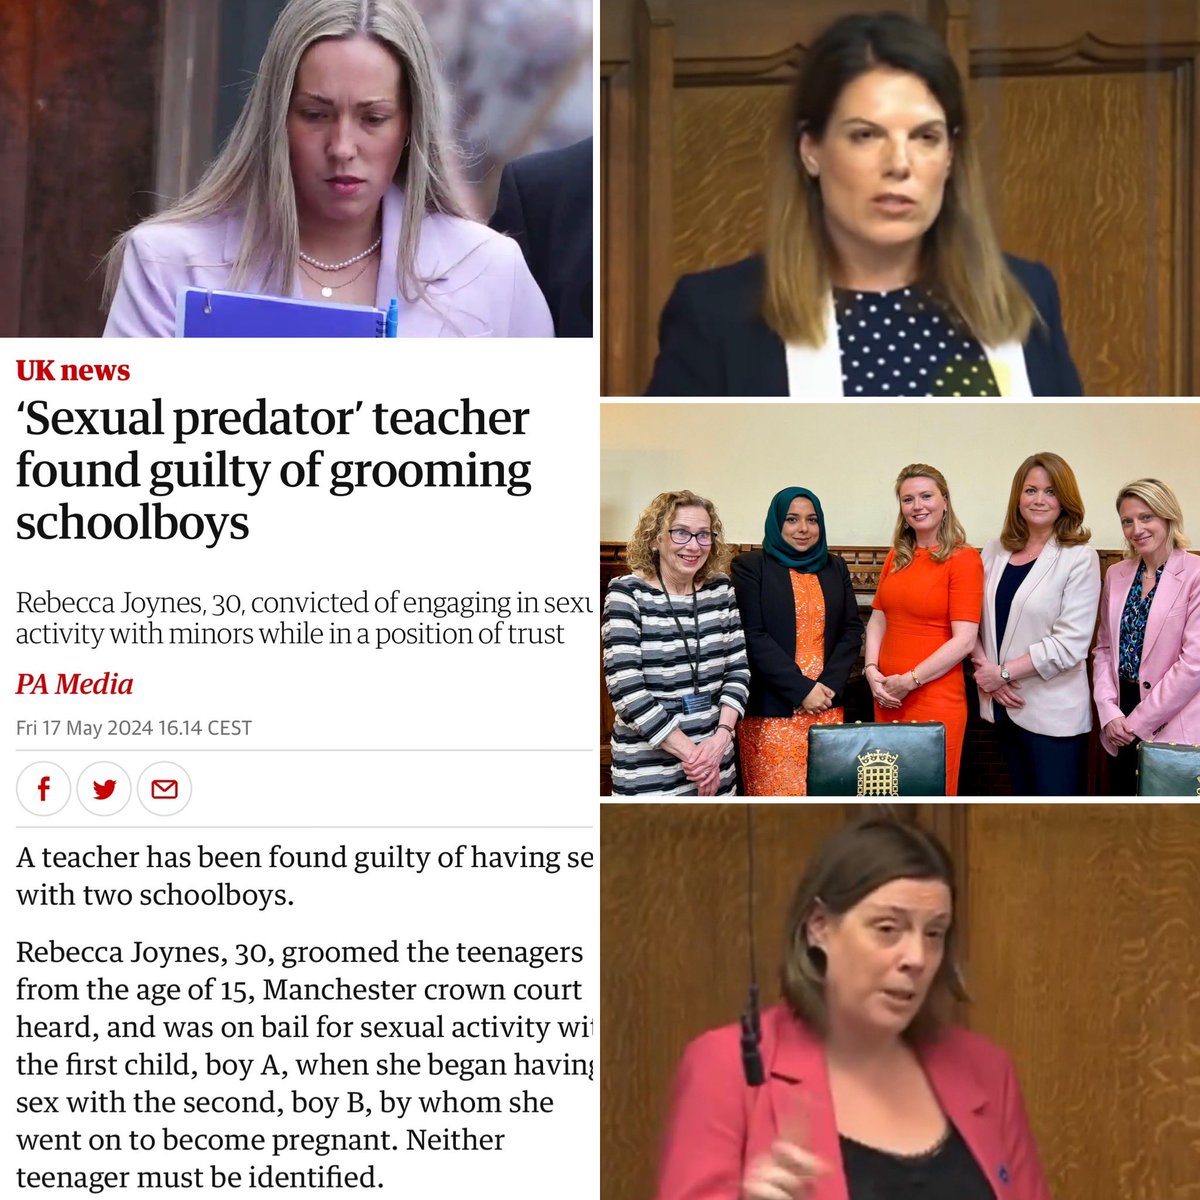 Do @carolinenokes @BarnettAdrienne @ApsanaBegumMP @DrProudman #KateKnivetonMP @LDNVictimsComm @Right2Equality @jessphillips presume that the involvement of the pedophile female teacher found guilty of sexually abusing 2 boys is detrimental to the child born from her criminal act?